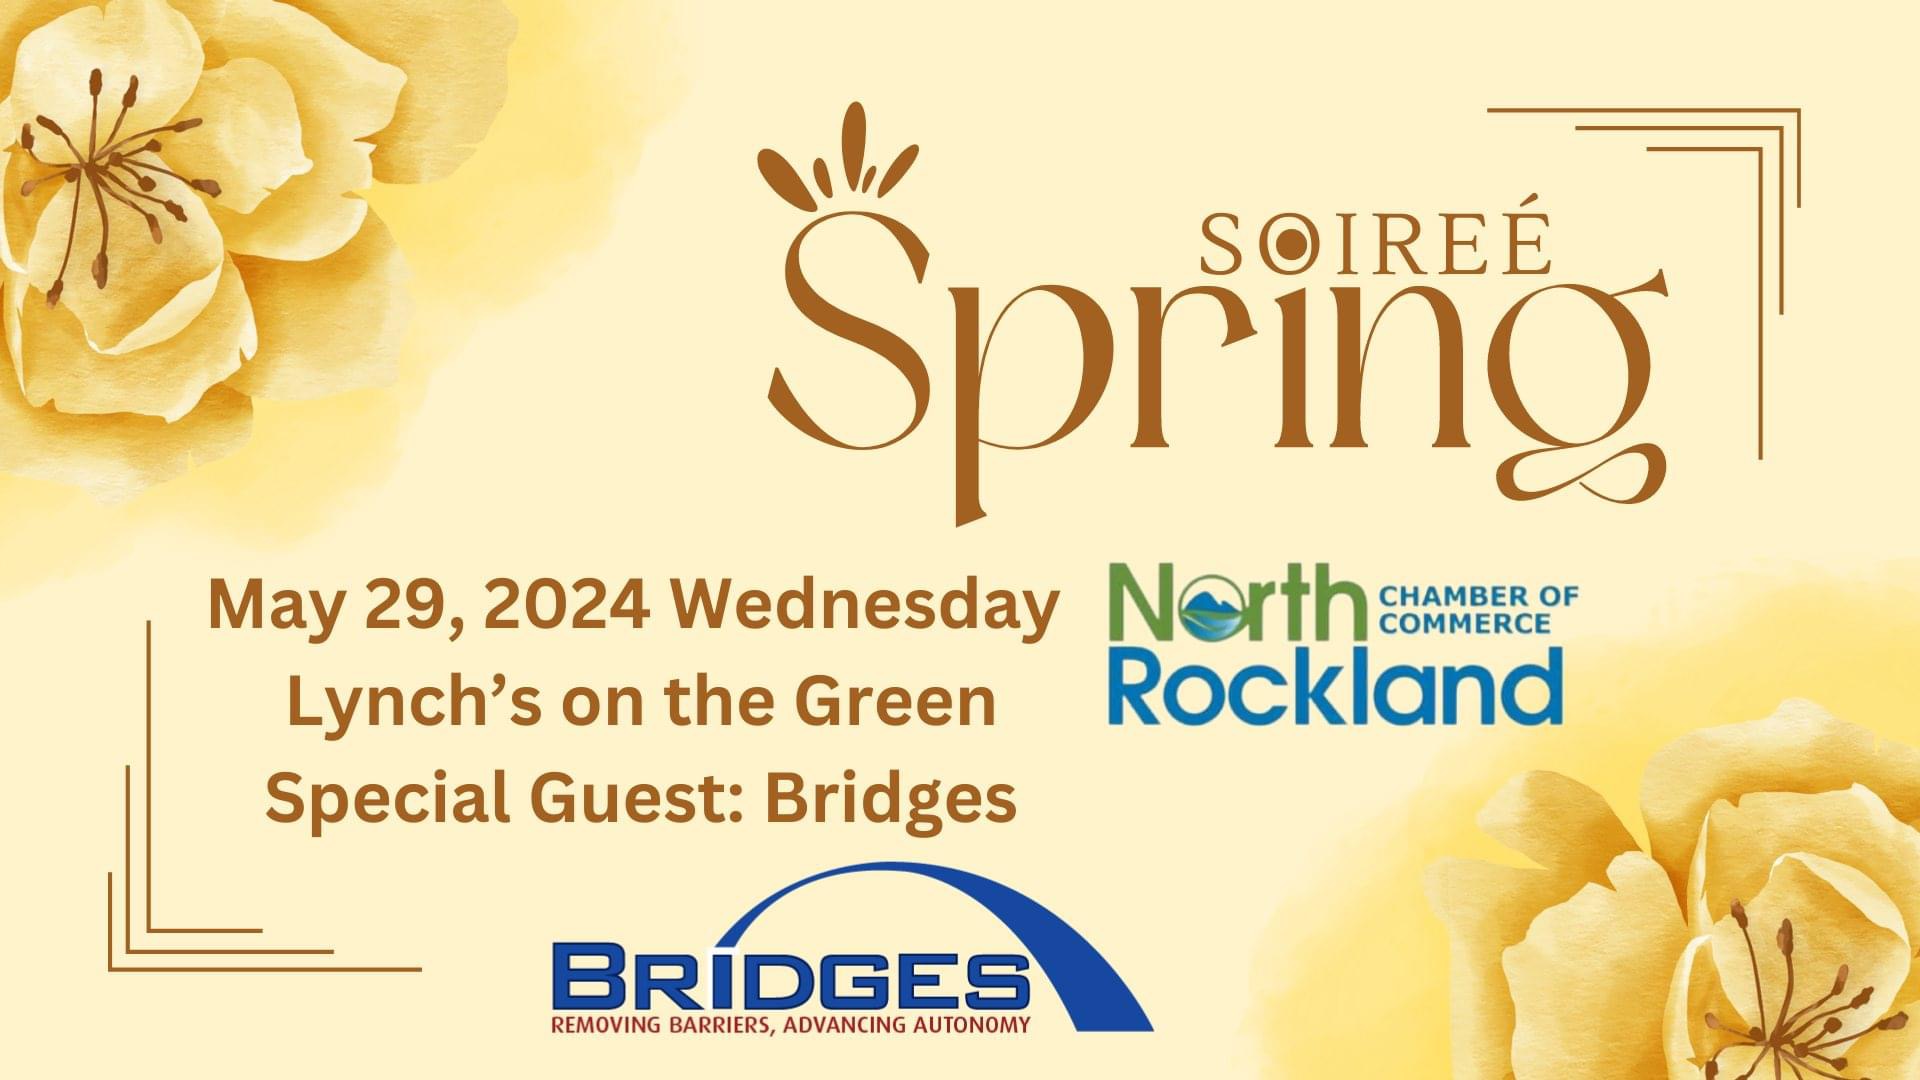 Spring Soiree ad 2024